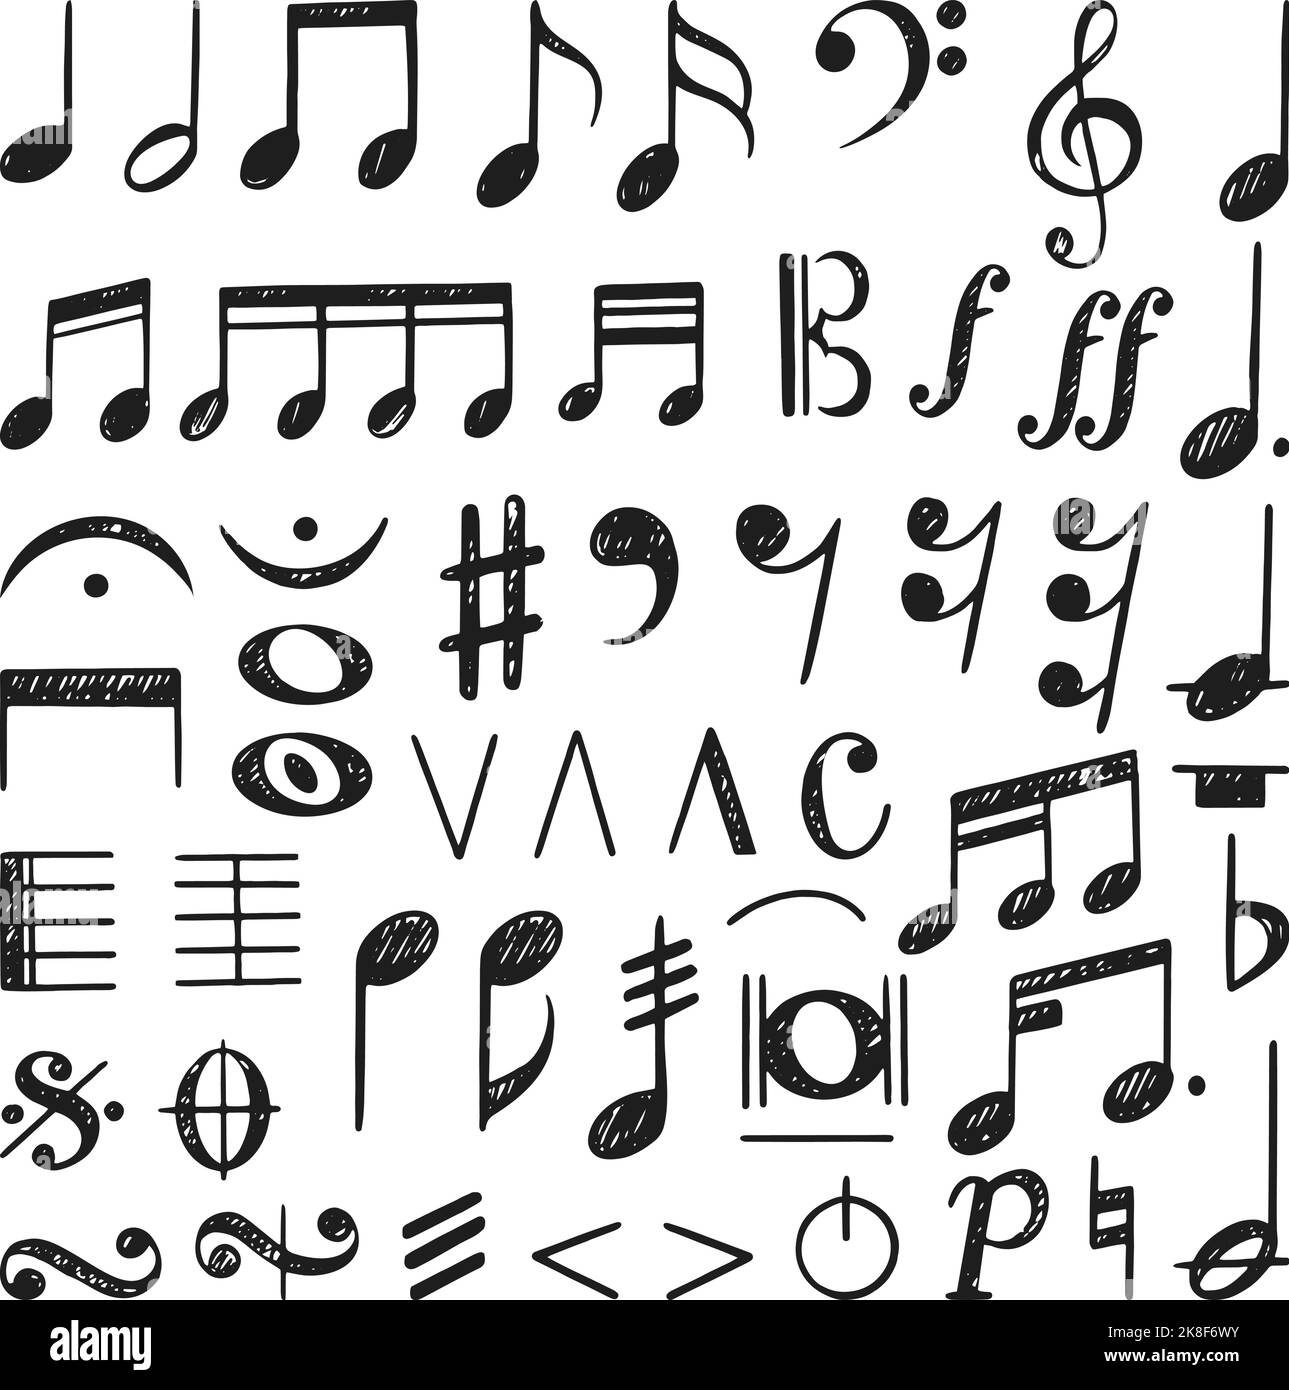 Music Note Sketch  Sketch Music Notes Png  800x980 PNG Download  PNGkit